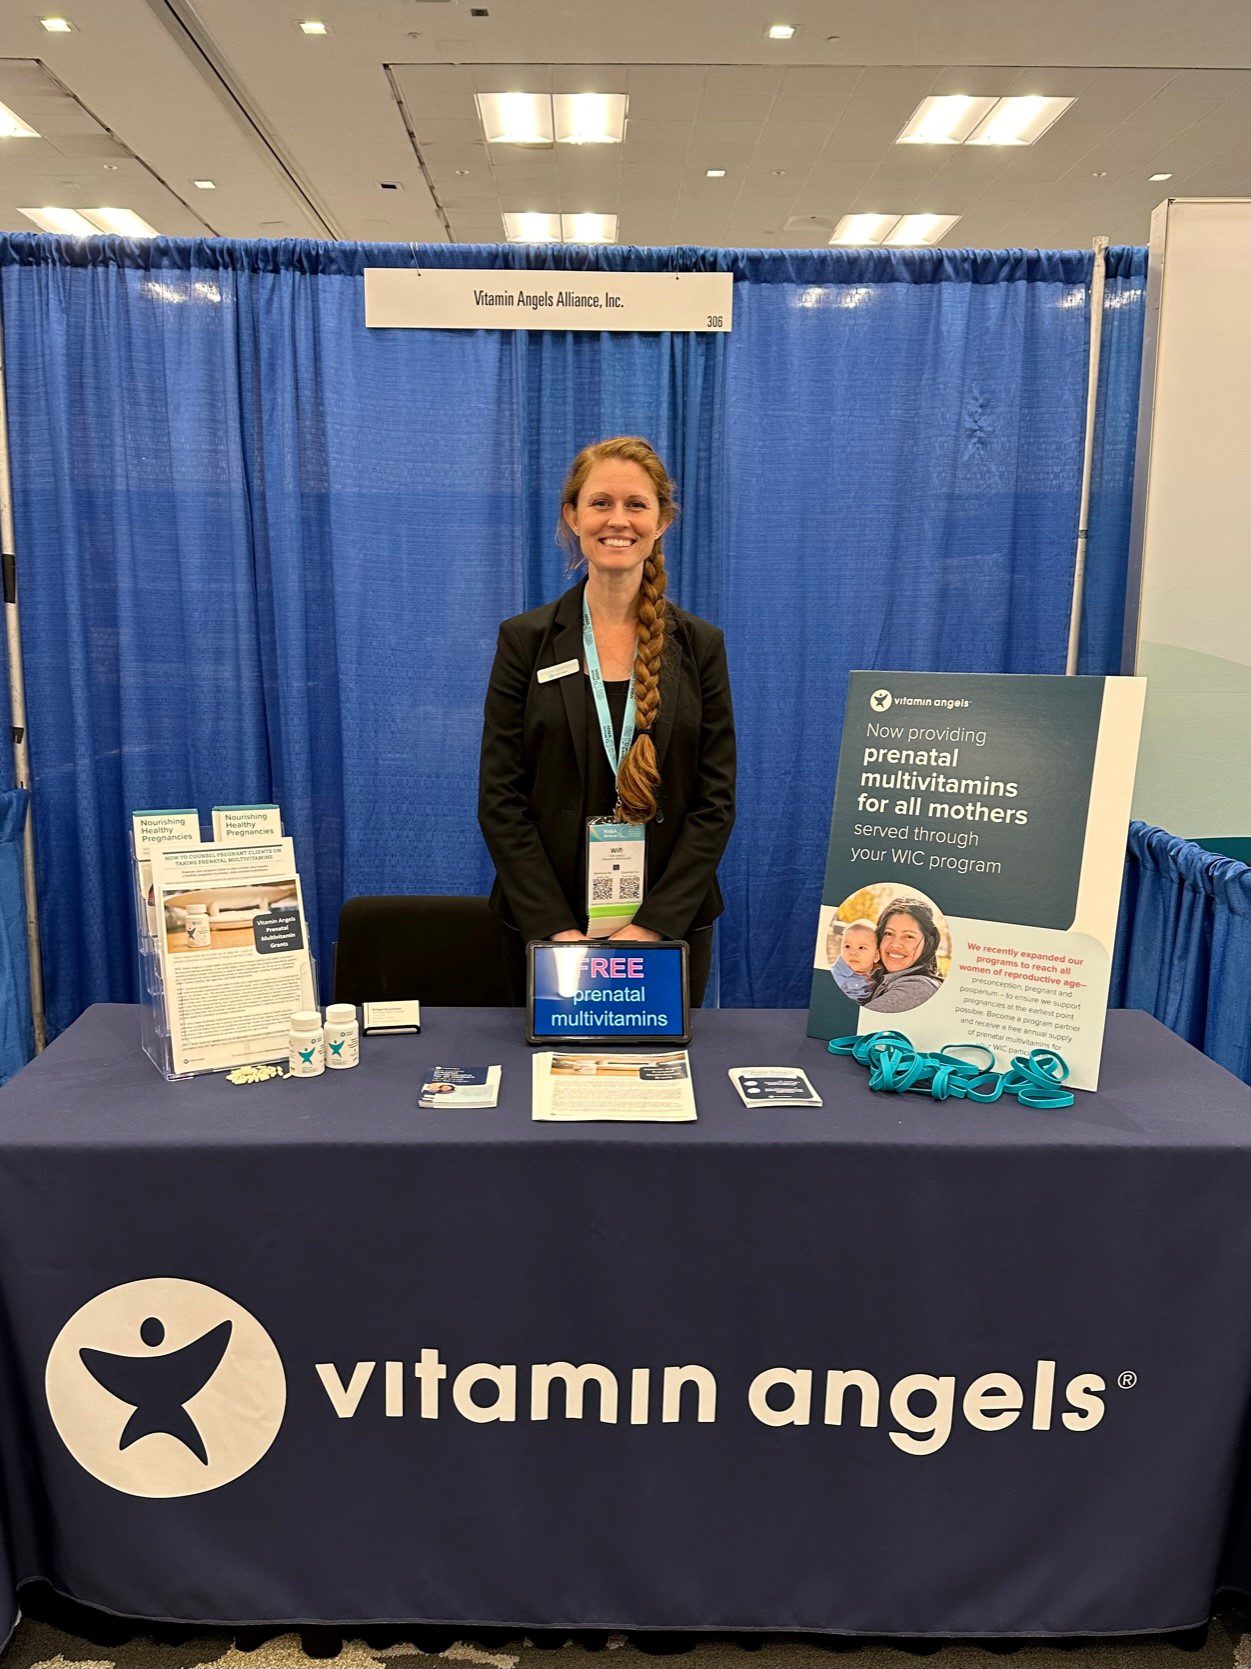 Bridget Quanstrom at the Vitamin Angels booth at the National WIC Association Conference 2023